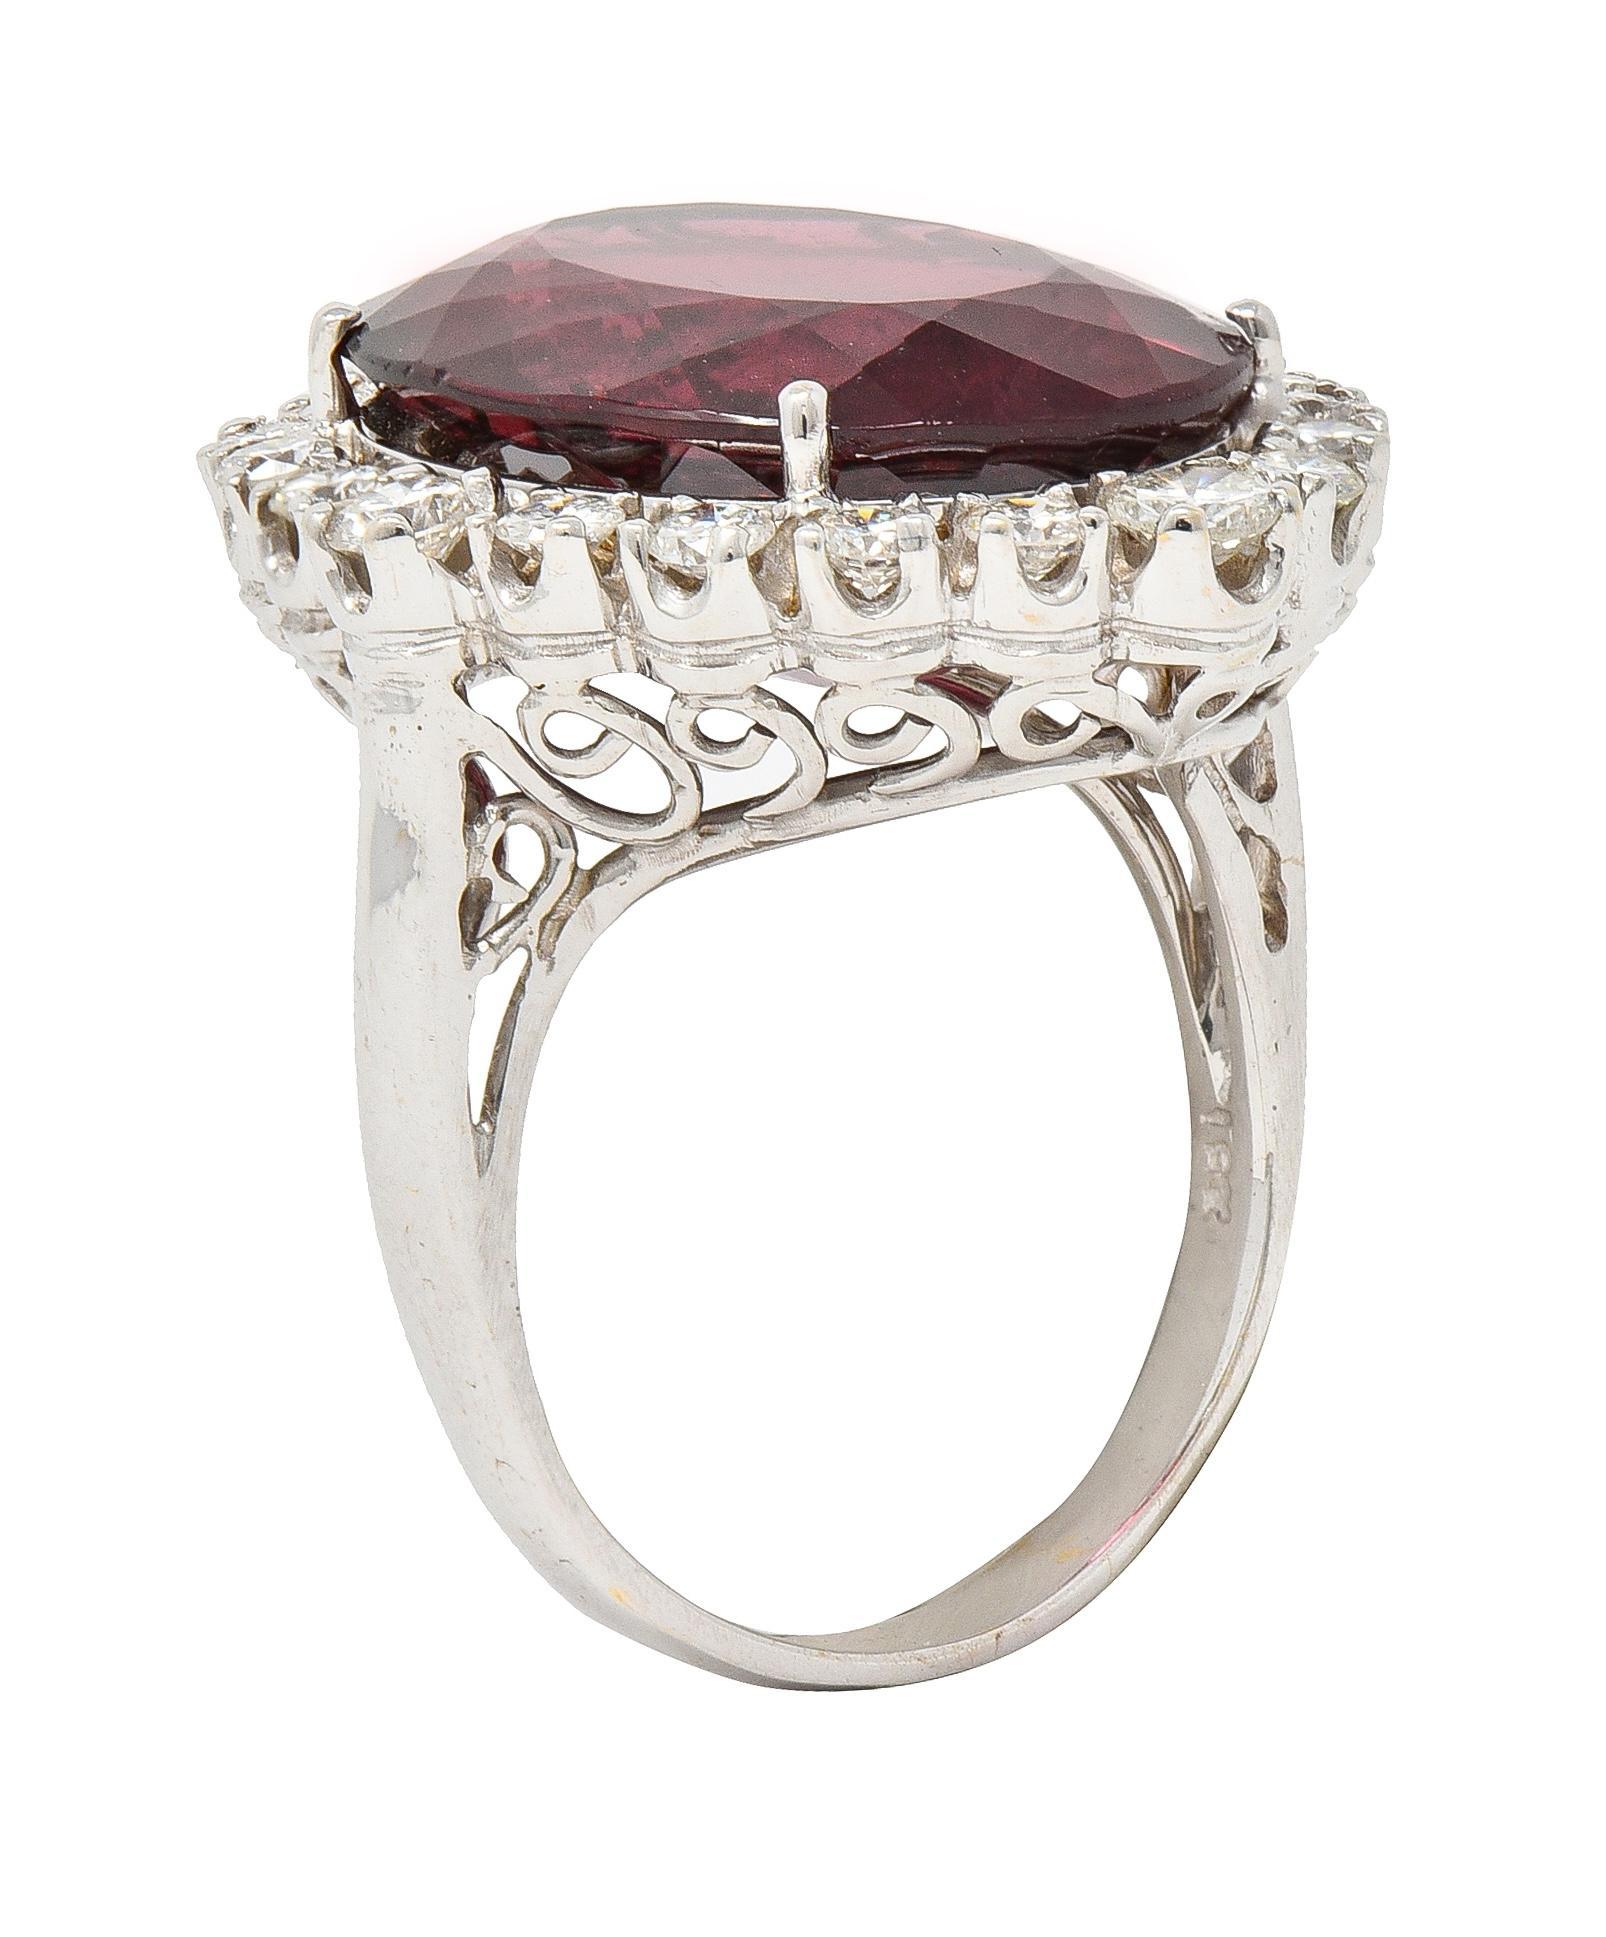 Cluster ring features an oval mixed cut rubellite tourmaline weighing approximately 13.65 carats
Medium dark red in color and surrounded by a round brilliant cut diamond halo
Weighing in total approximately 1.25 carats with H/I color and VS